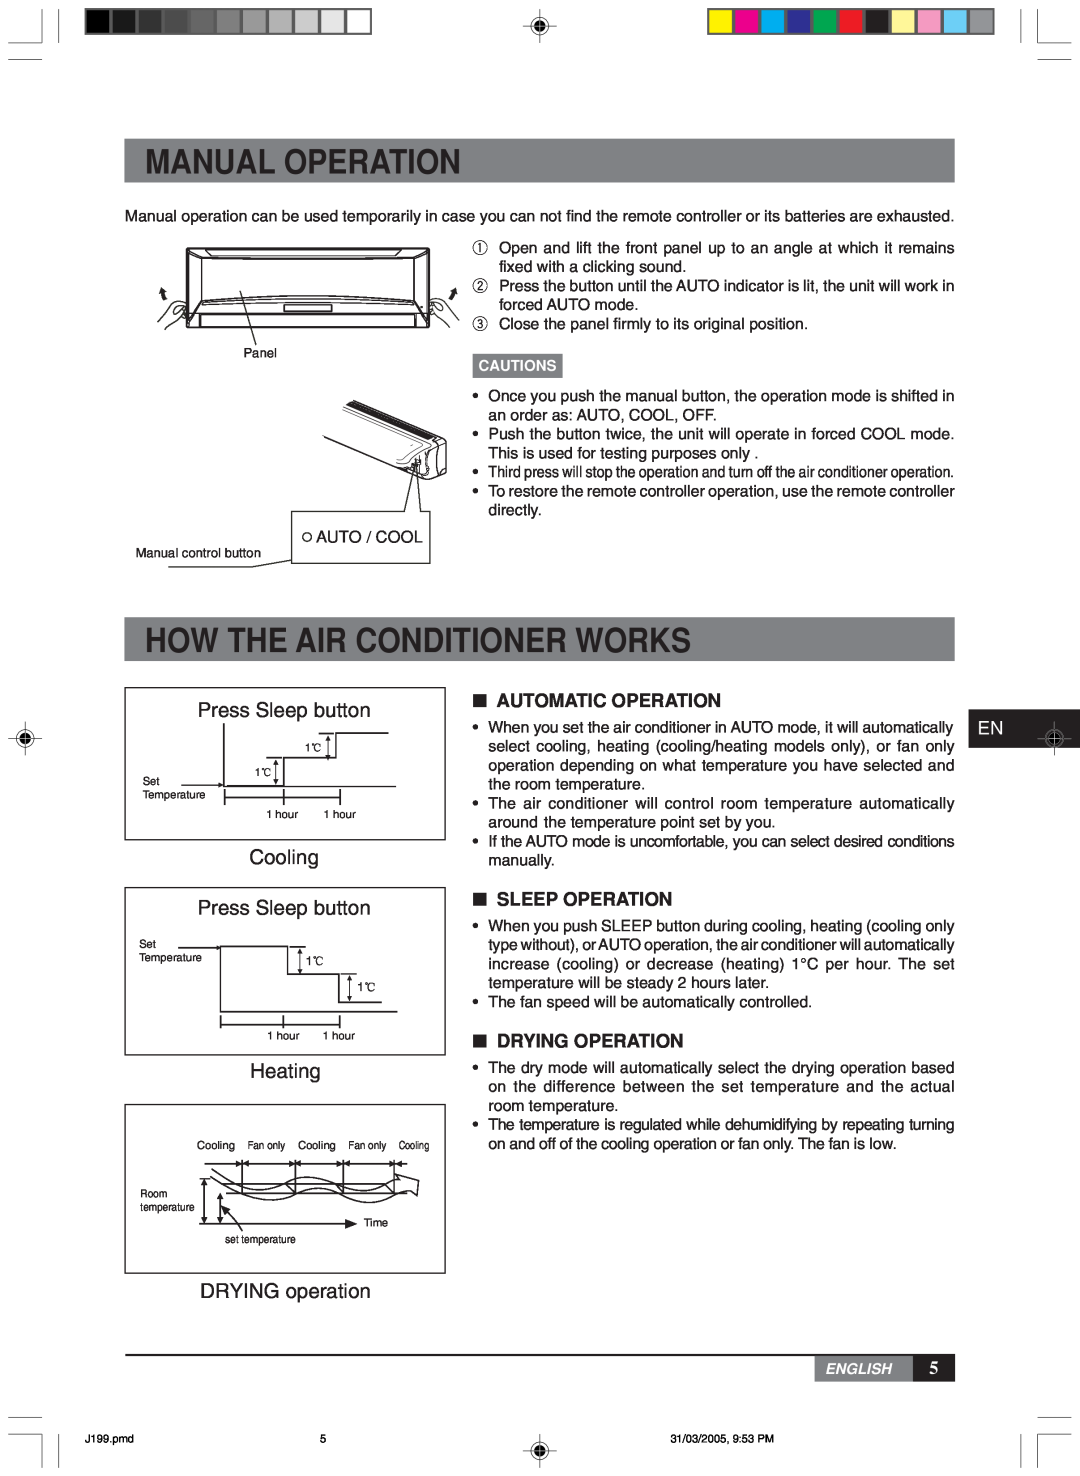 York MLCA-MLHA-07-24 Manual Operation, How The Air Conditioner Works, Press Sleep button, Cooling, Heating, Auto / Cool 